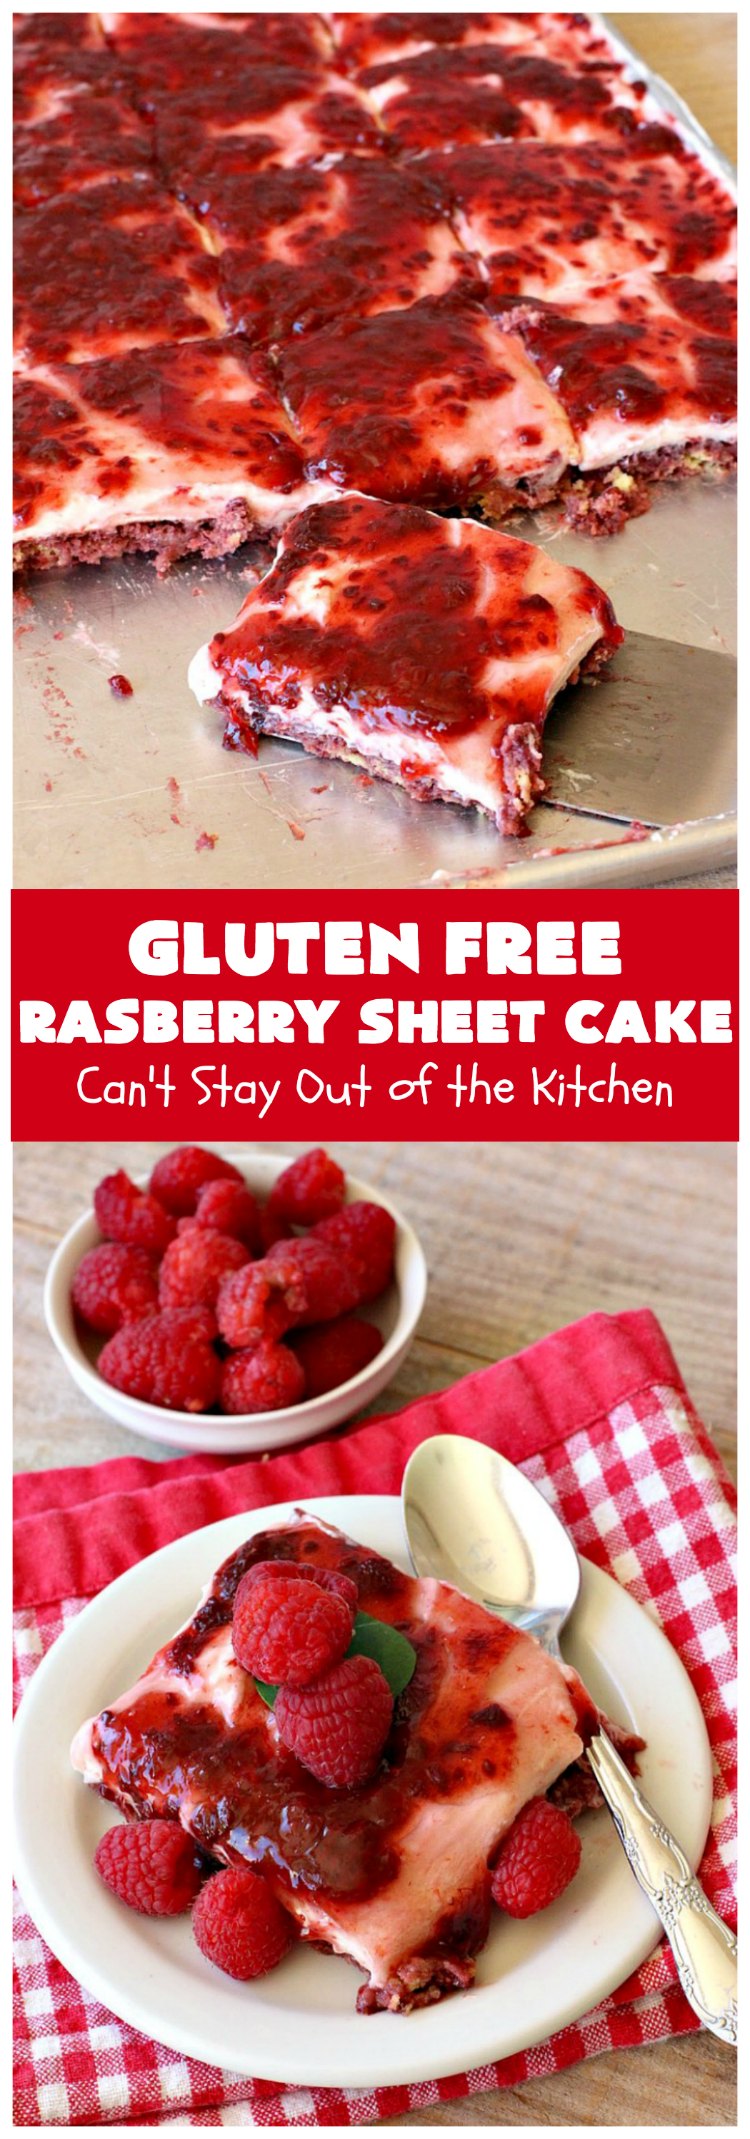 Gluten Free Raspberry Sheet Cake | Can't Stay Out of the Kitchen | this luscious #raspberry #cake will knock your socks off! It's terrific for #Christmas, #ValentinesDay or other #holidays. #Dessert #HolidayDessert #RaspberryDessert #GlutenFree #RaspberrySheetCake #GlutenFreeRaspberrySheetCake 